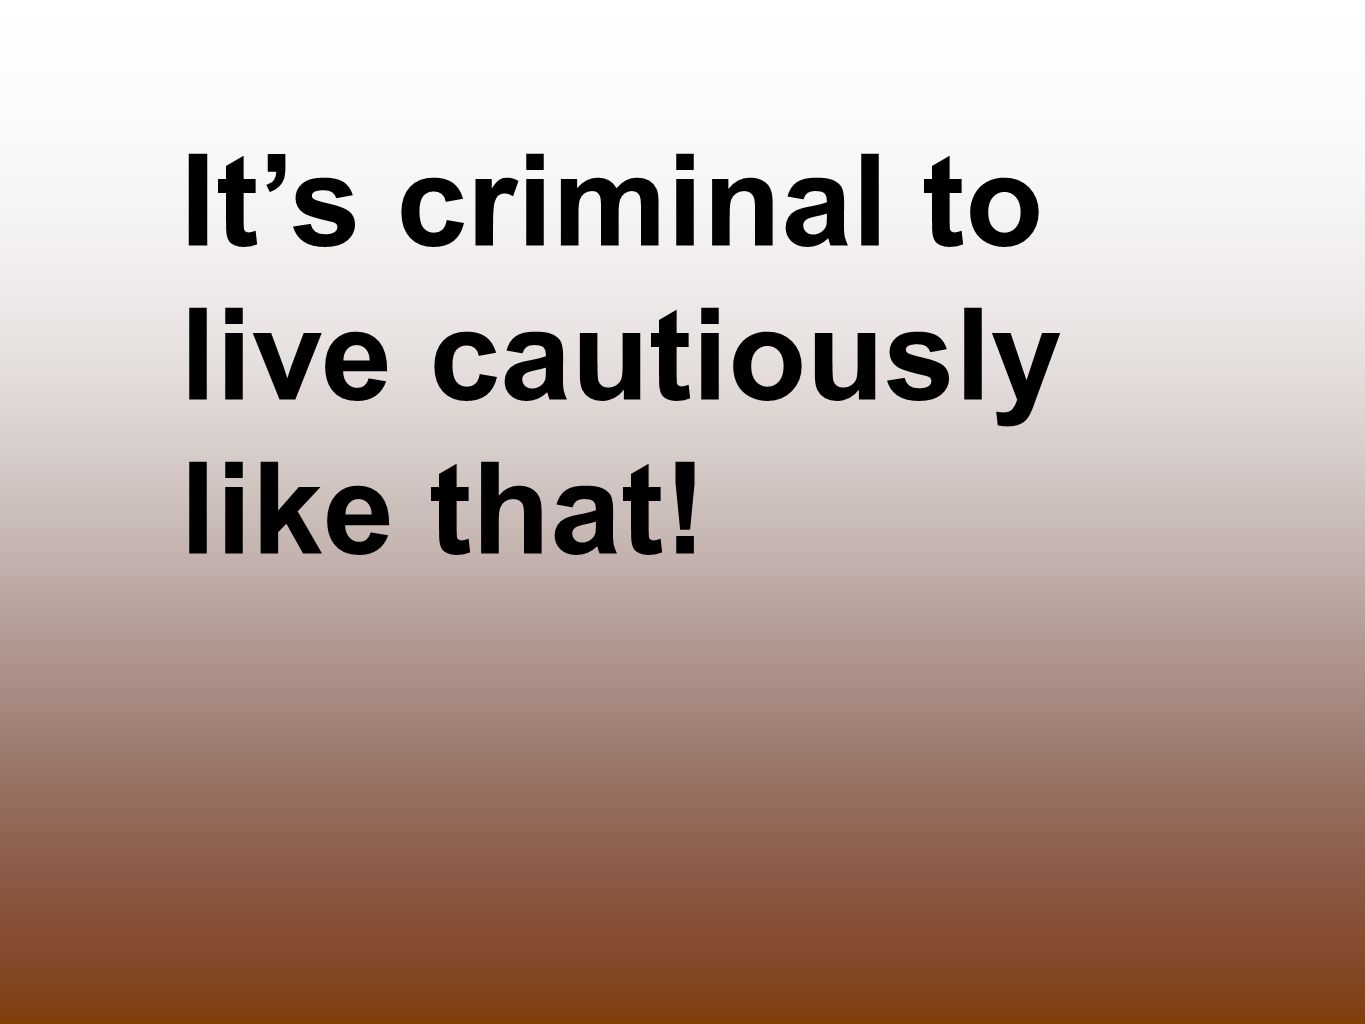 It’s criminal to live cautiously like that!